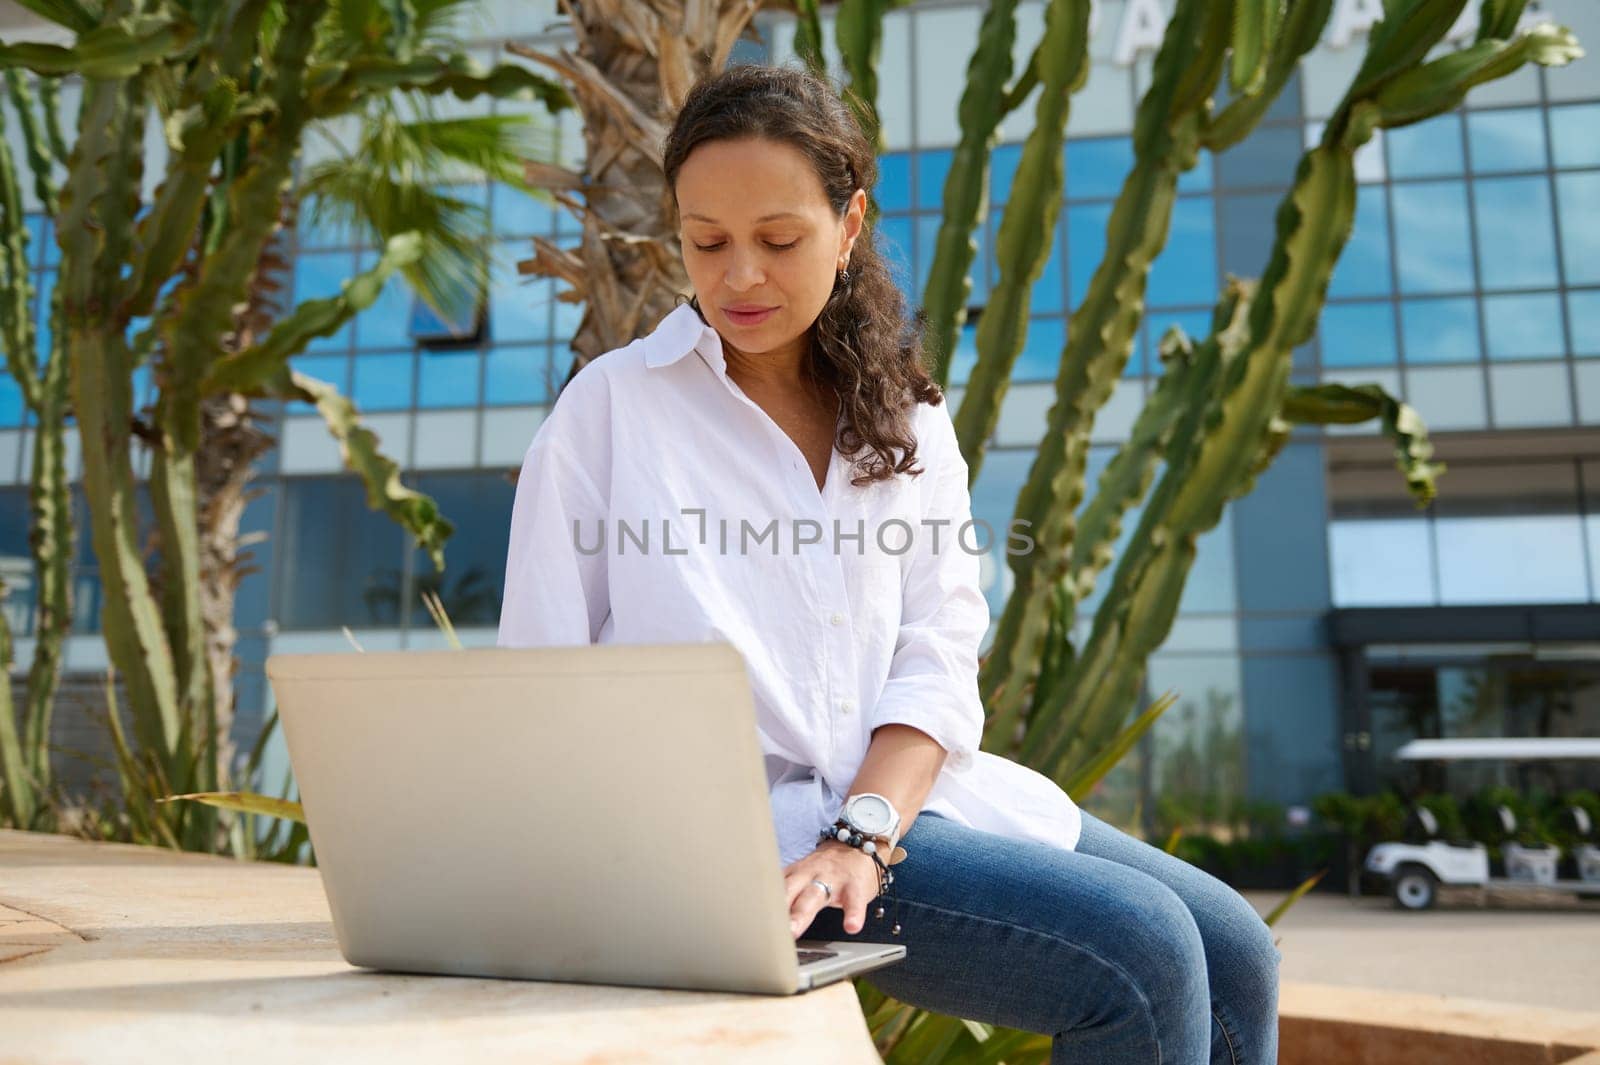 Latin American young woman student in blue jeans and white shirt, typing text on laptop, online working on diploma project sitting outdoor on a stairs, against modern high rise buildings background